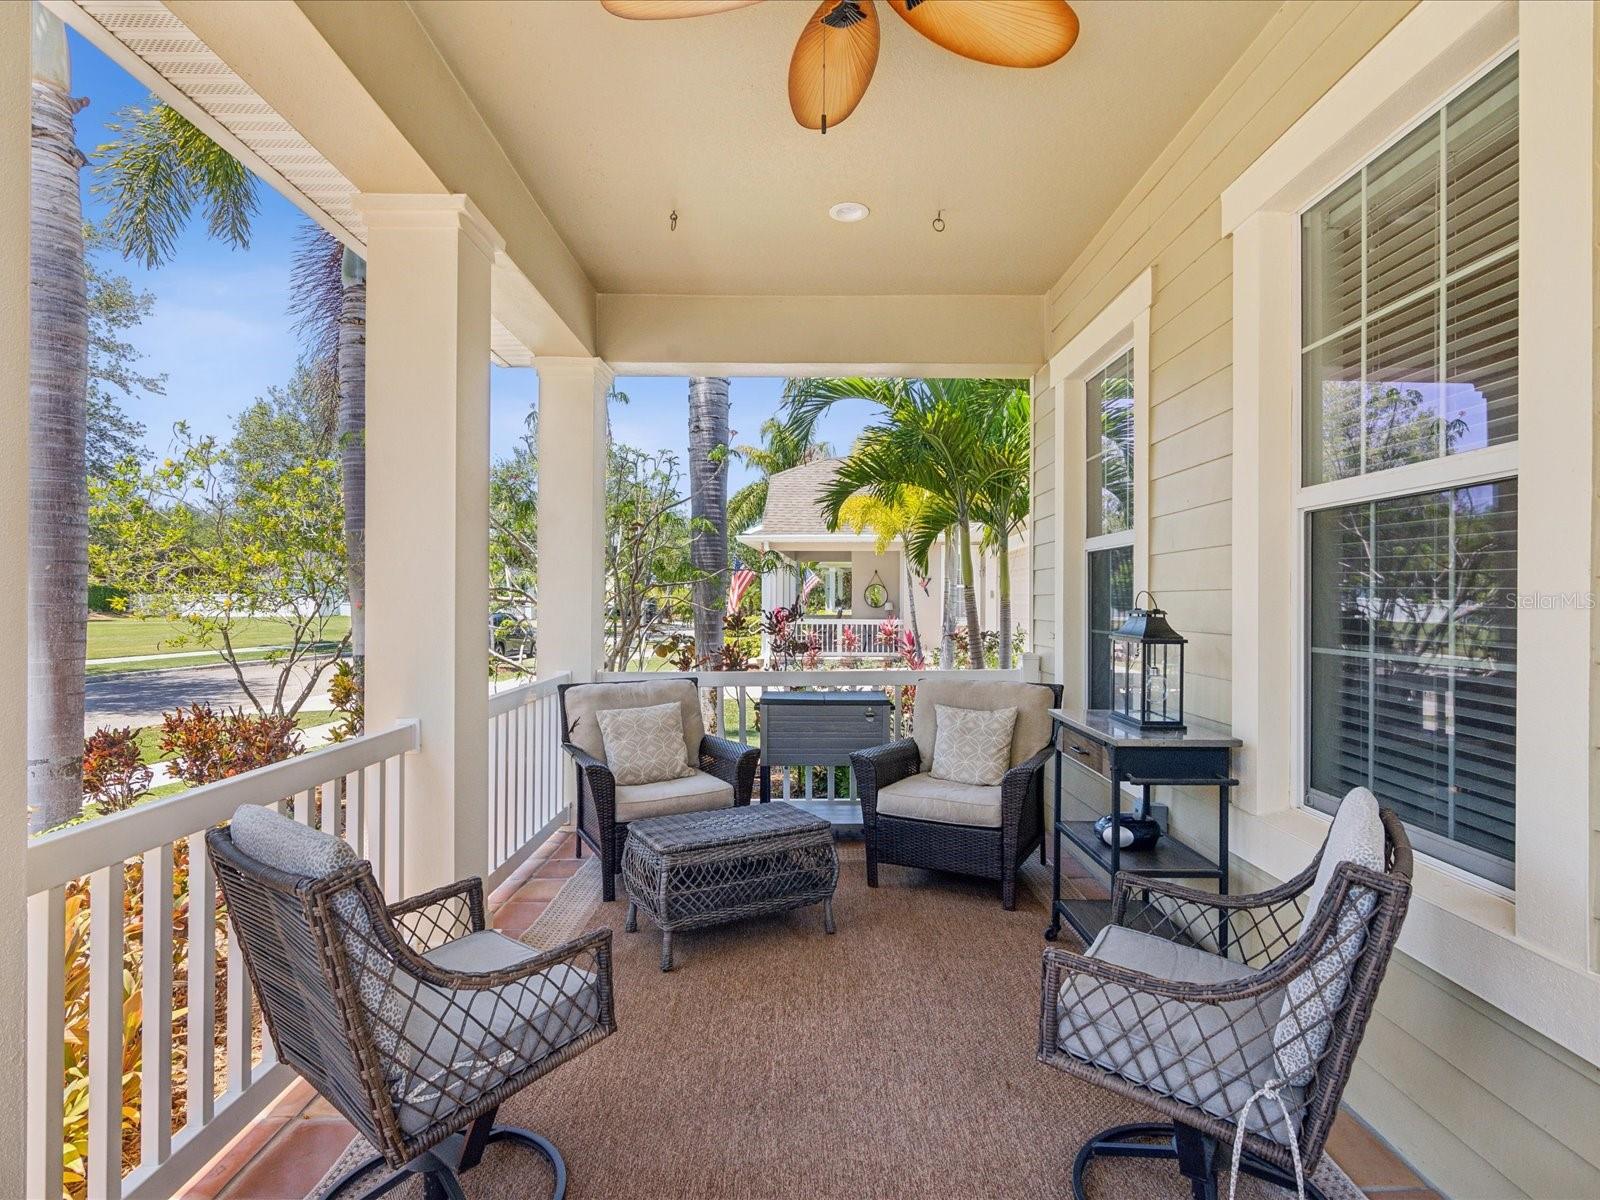 Enjoy the southerly breeze and hours of conversation on your inviting front porch.